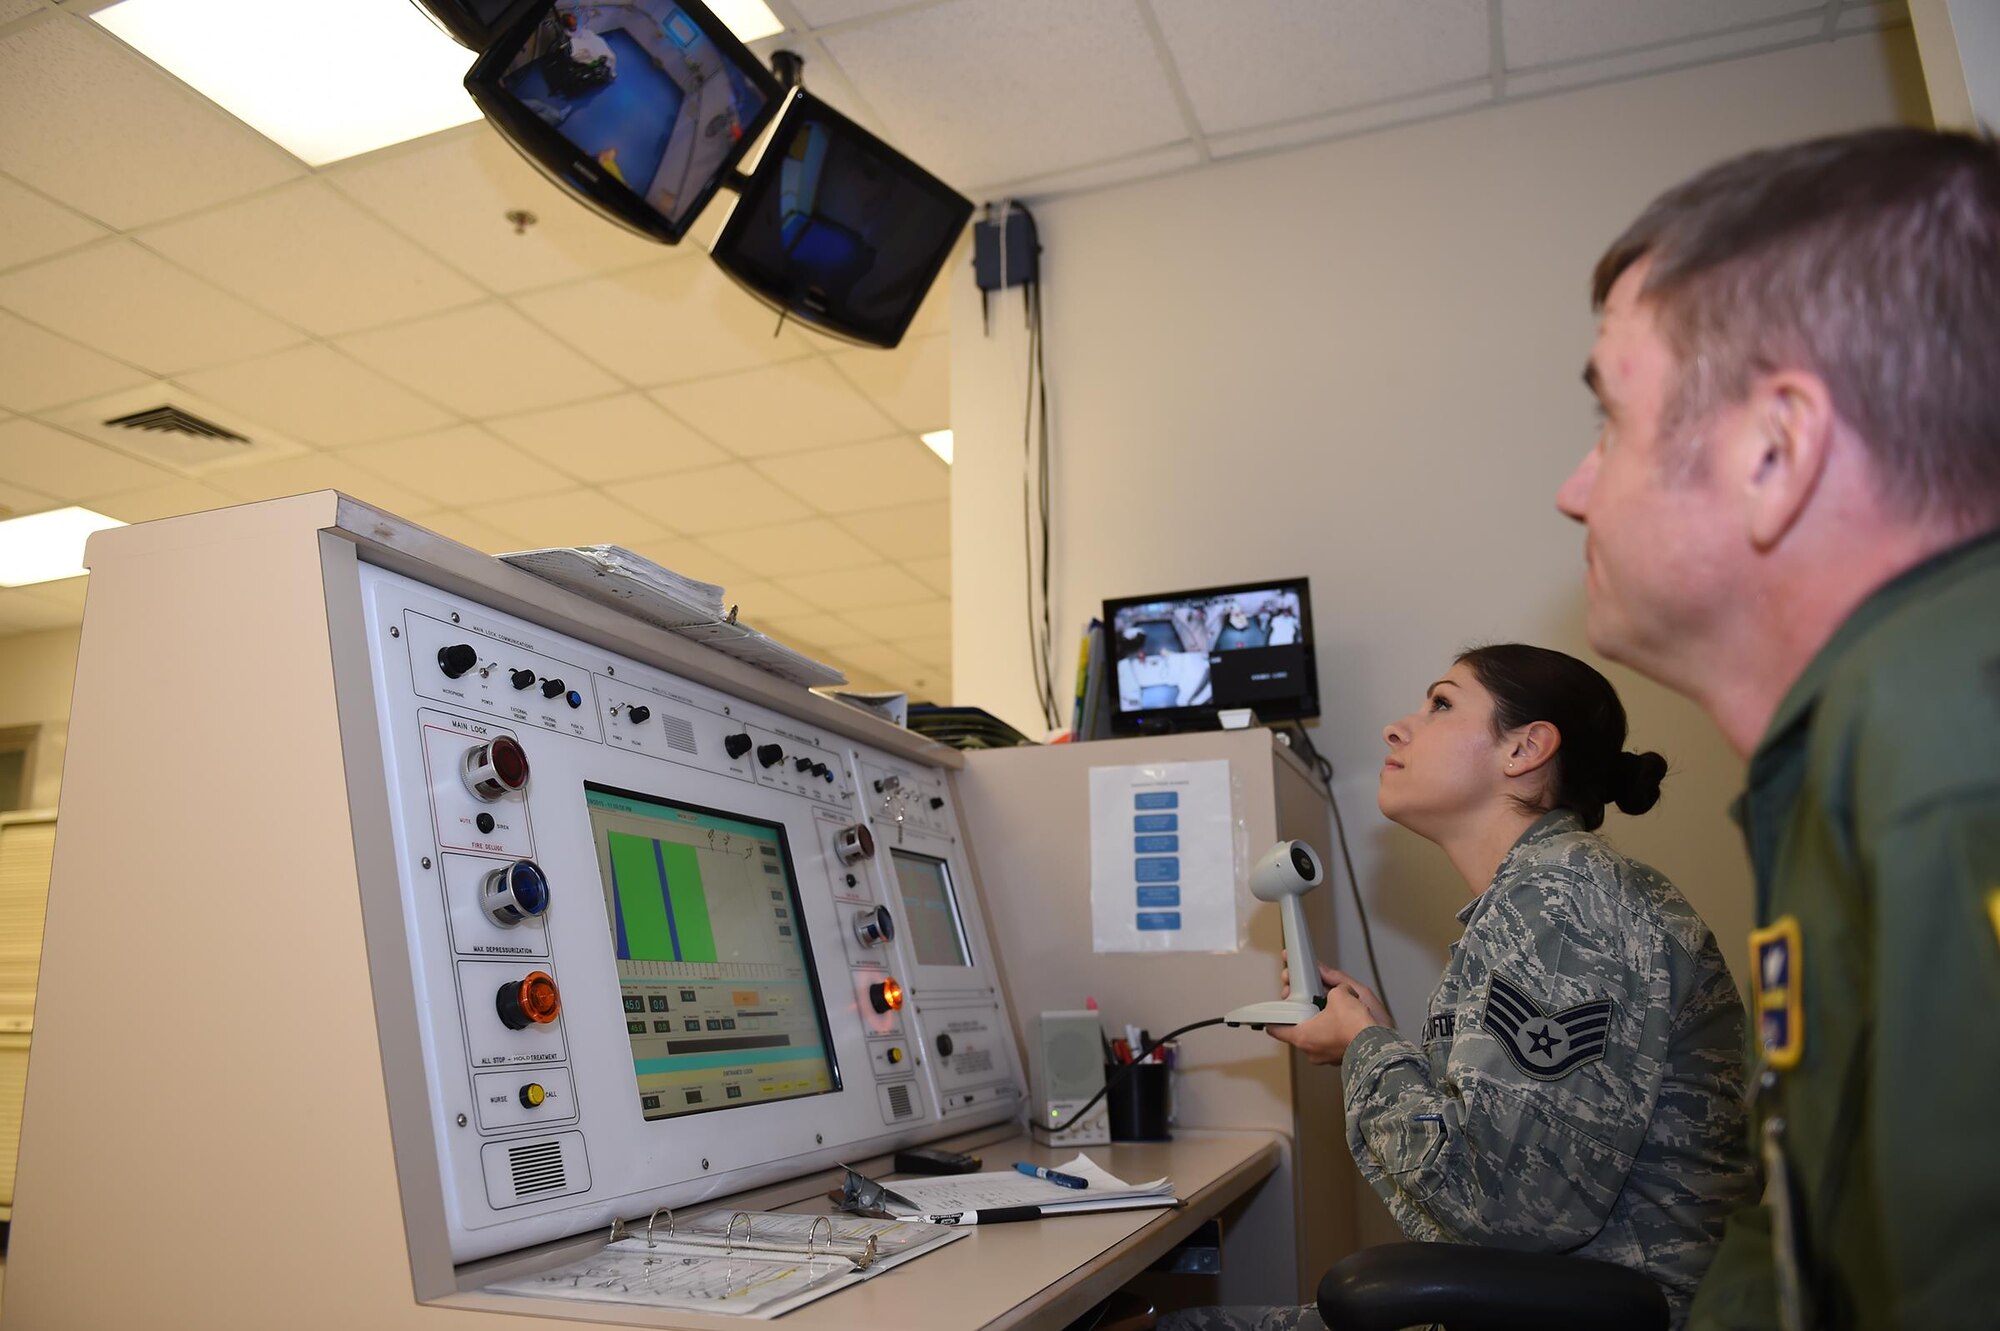 Col. Michael Richards and Staff Sgt. Maribel Cortez communicate with patients undergoing treatment in the multiplace hyperbaric chamber at the Wilford Hall Ambulatory Surgical Center, Joint Base San Antonio-Lackland, Nov. 18, 2015. Patients are closely monitored during each dive by technicians and doctors, both inside and out of the chamber, to ensure patient safety at all times. Richards is the 59th Hyperbaric Medicine Flight commander; Cortez is a hyperbaric medical technician. (U.S. Air Force photo / Tech. Sgt. Christopher Carwile)